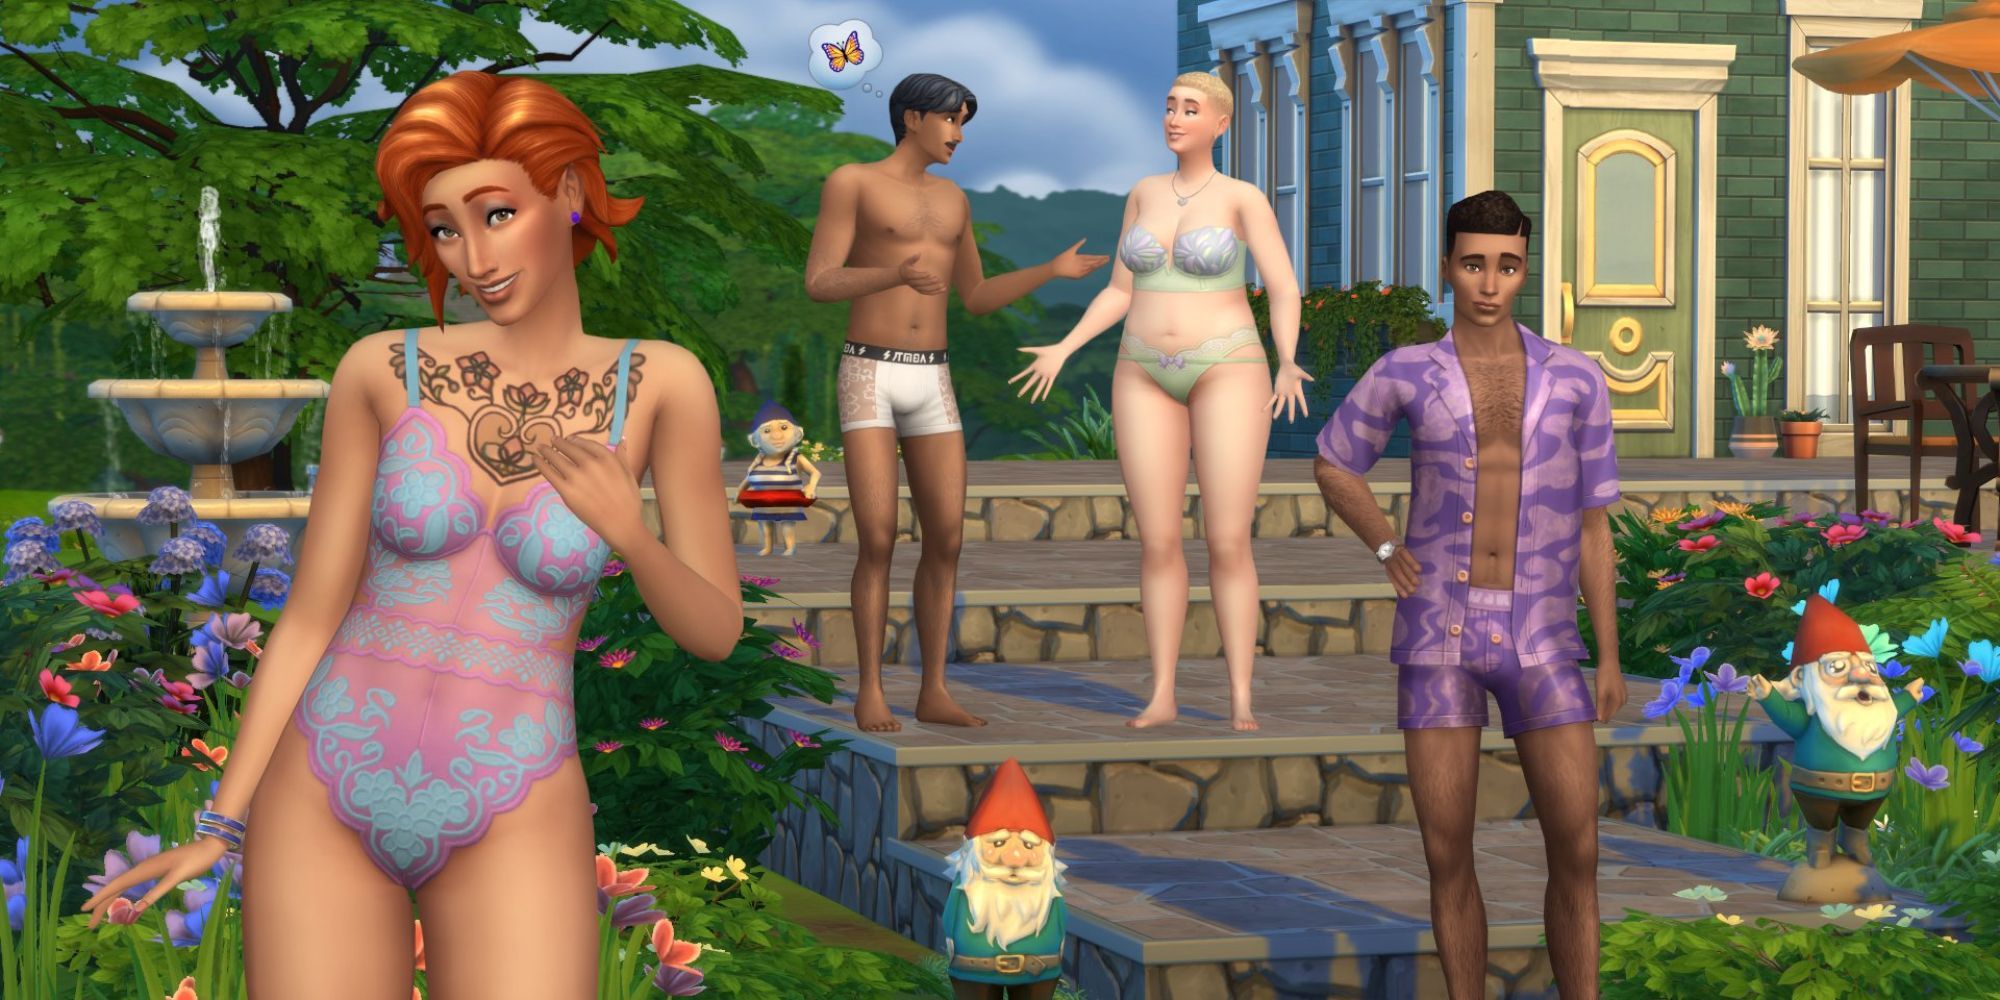 A quartet of Sims show off some of the new Simtimate underwear and lingerie options